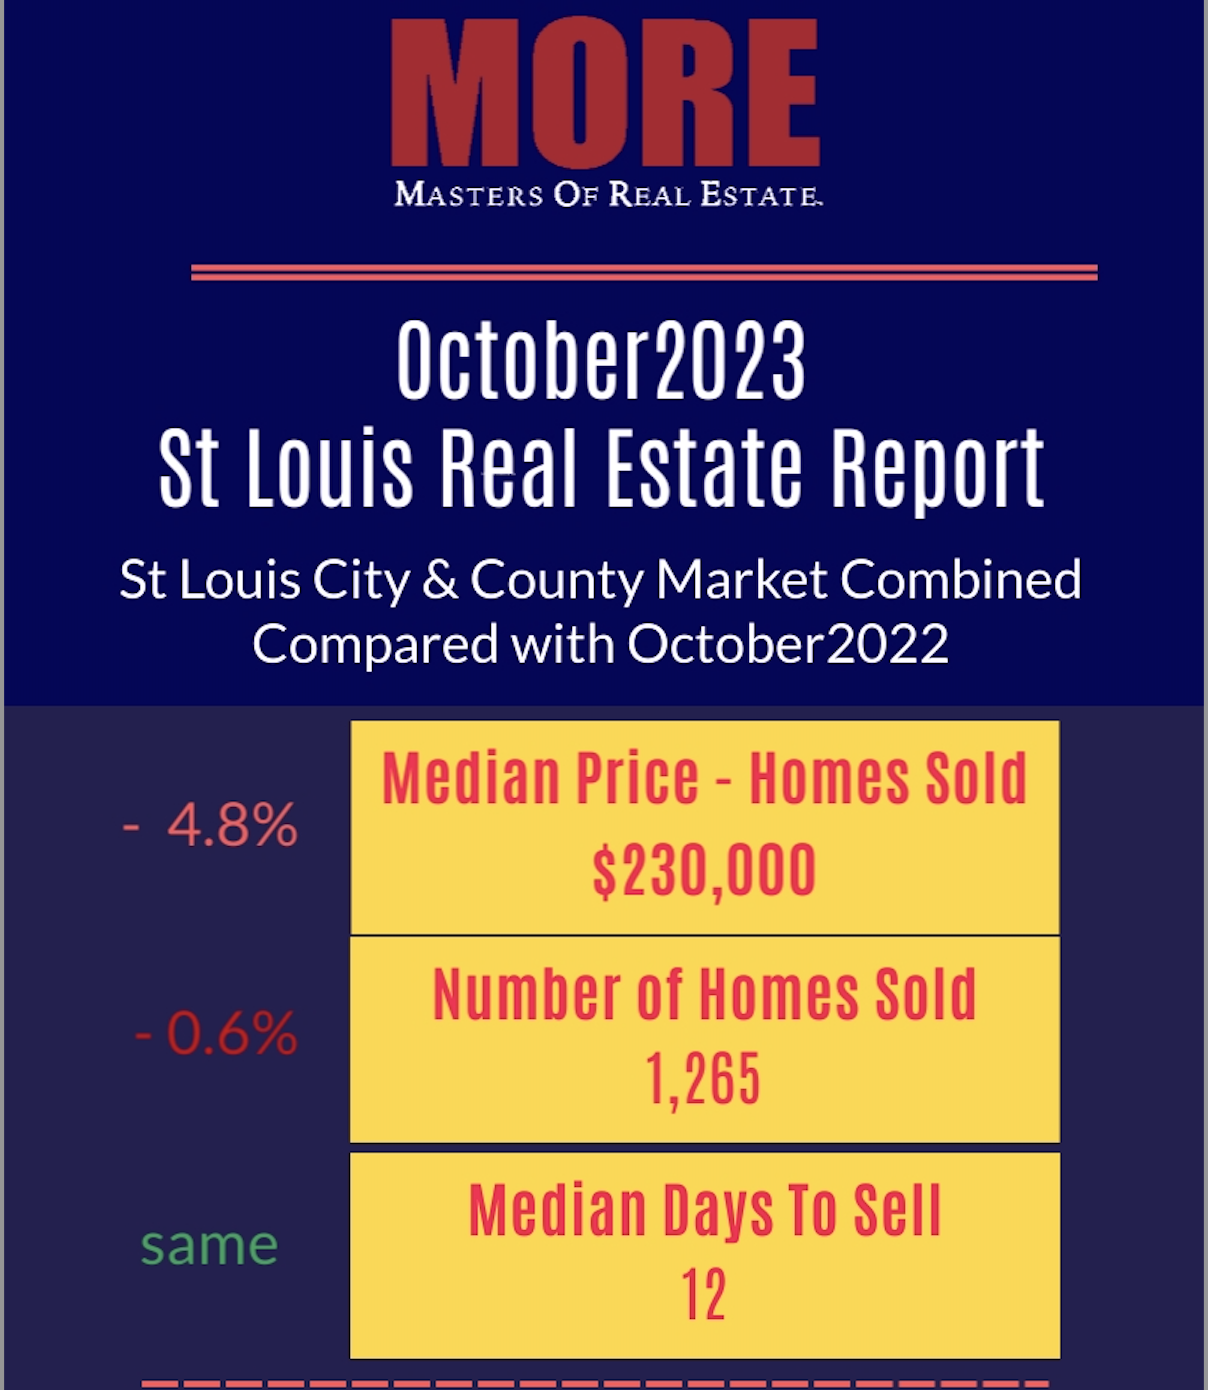 St Louis Real Estate Report for October 2023